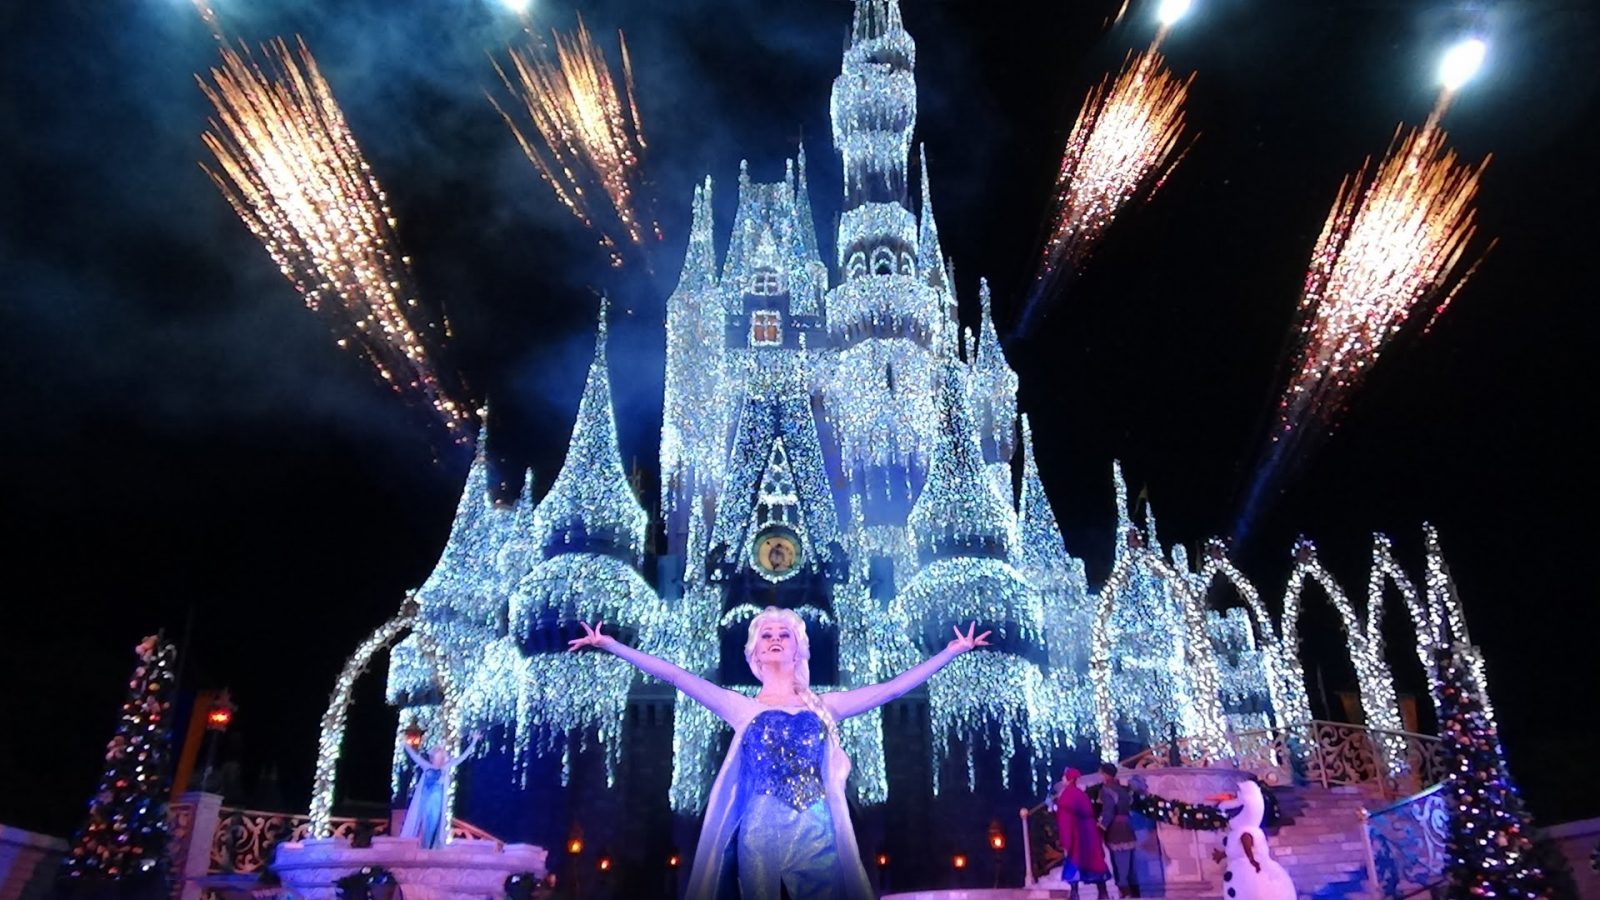 Disney castle with Elsa decorated for Christmas